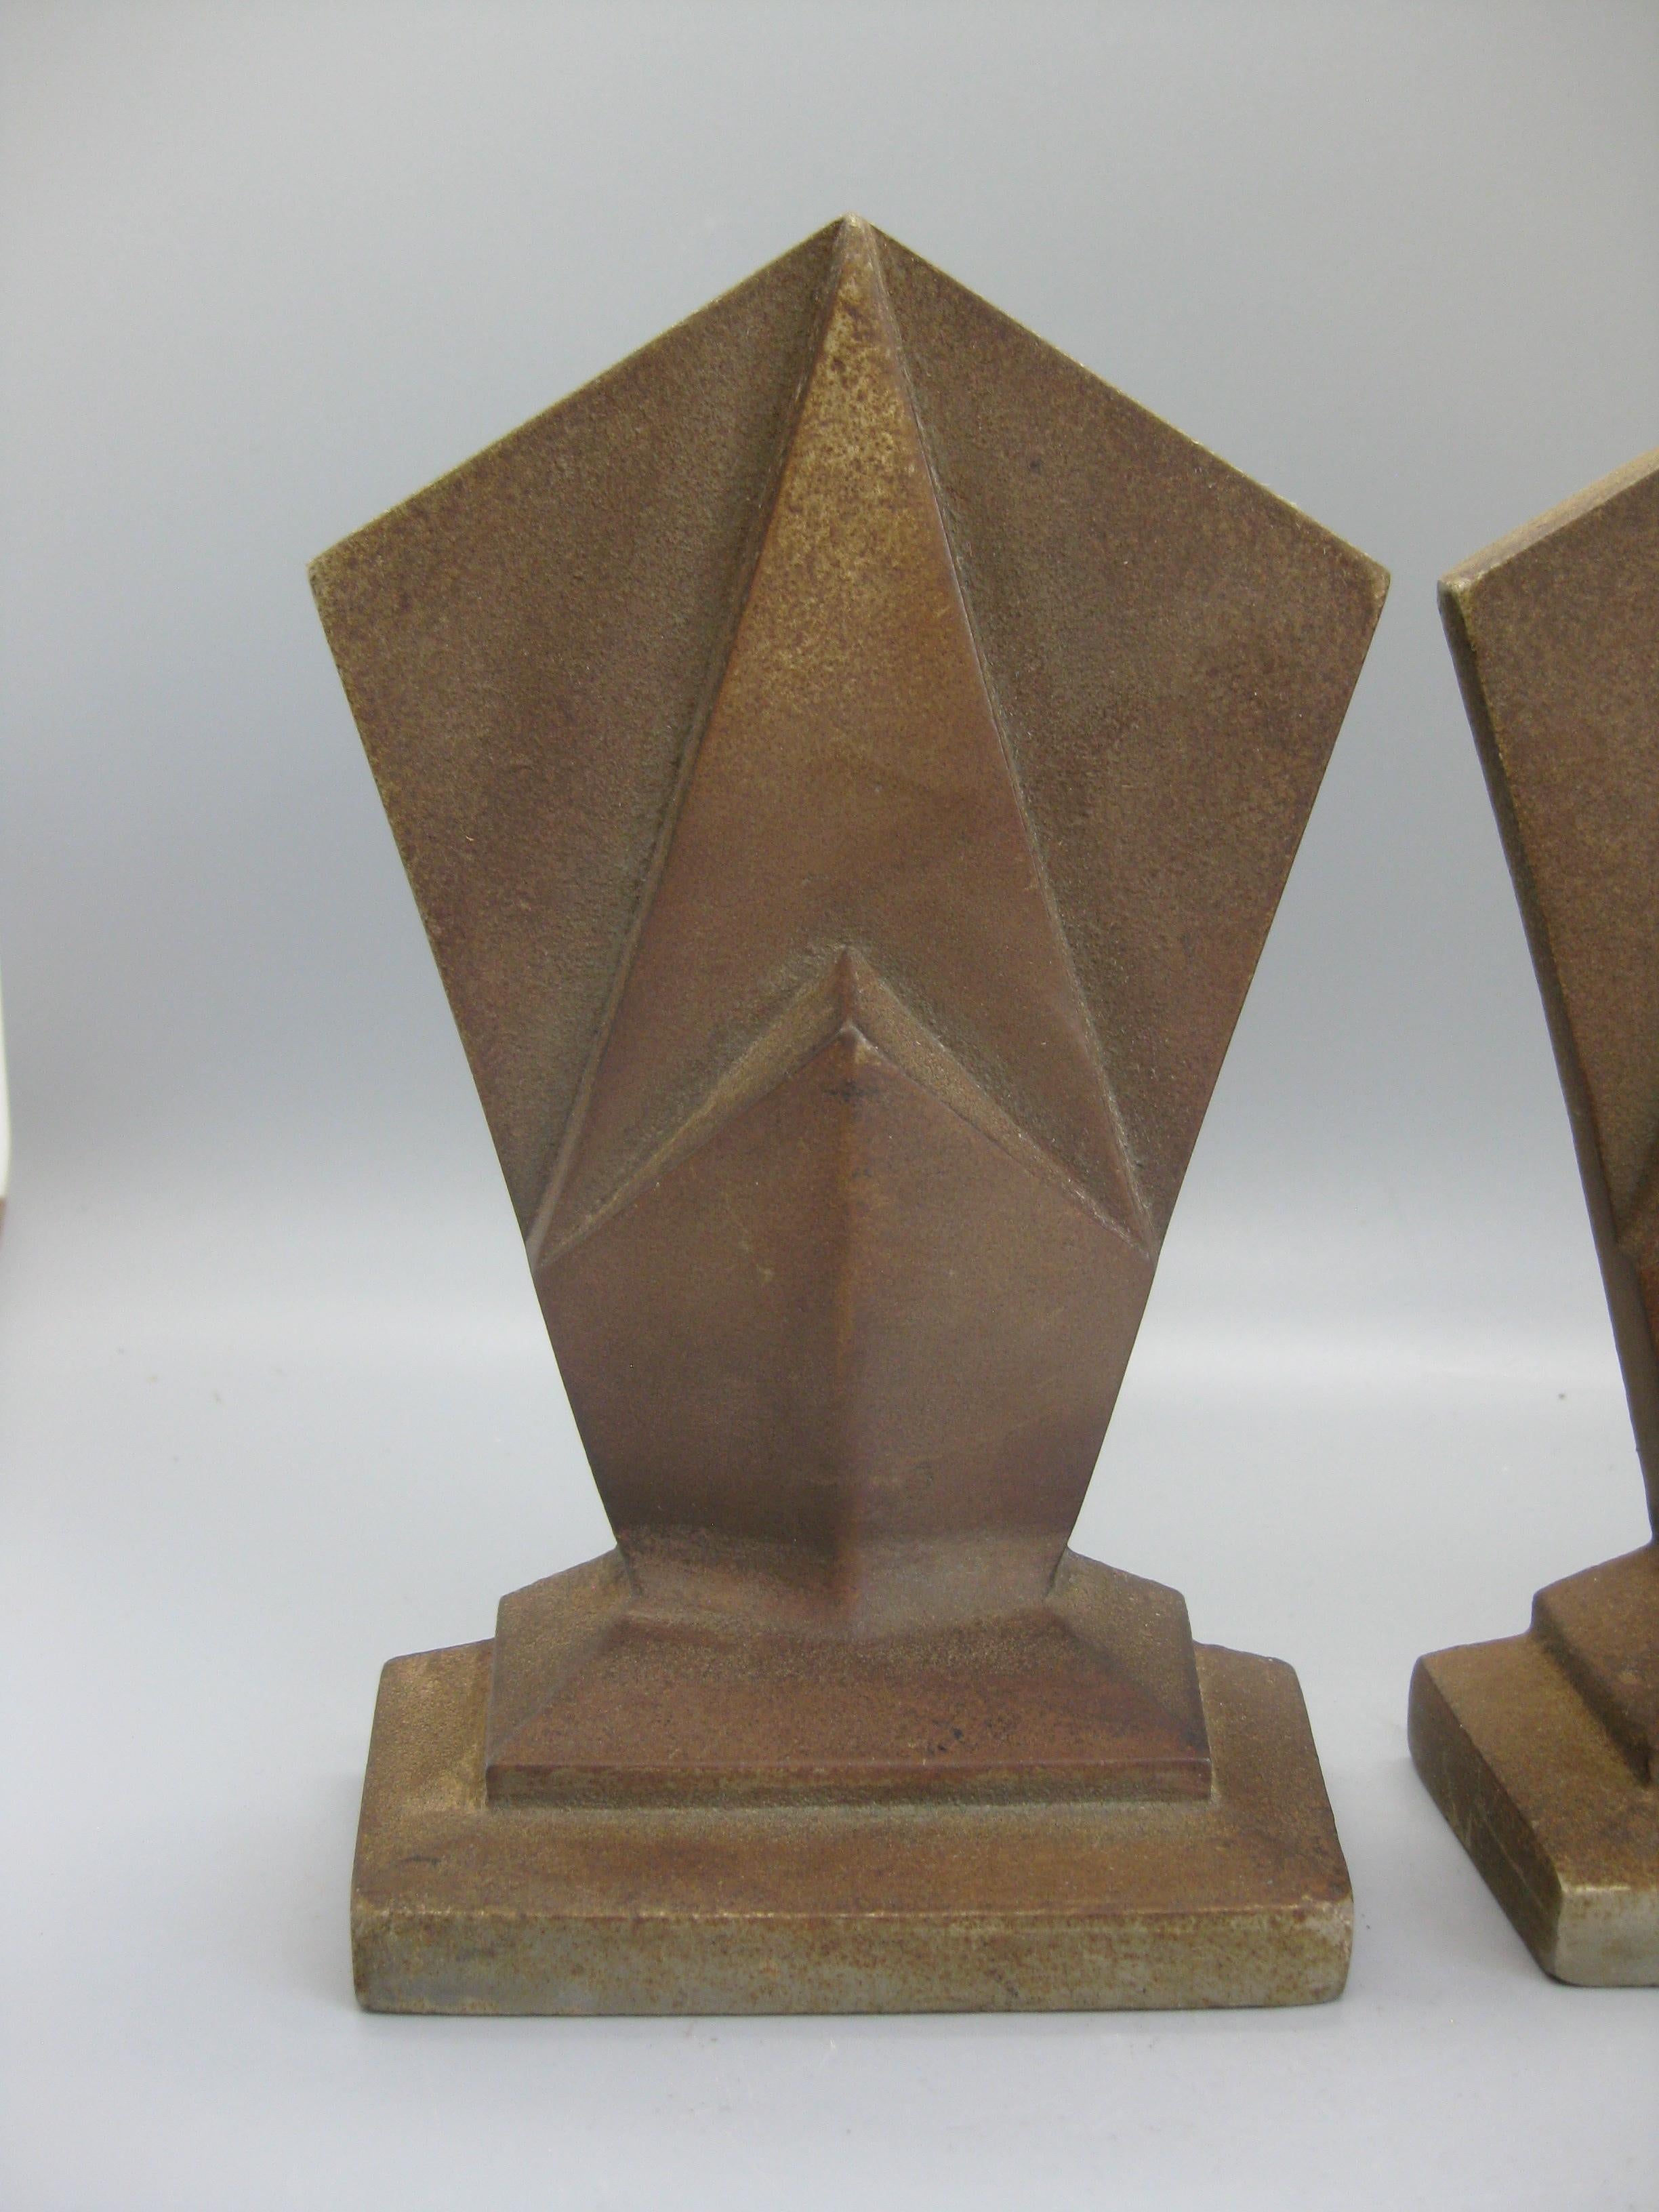 Great pair of antique Art Deco Hubley model #307 cast iron geometric skyscraper bookends and date from the 1920s-early 1930s. These are made of cast iron and have a nice old patina. Great details and design. Signed on the back. In nice original